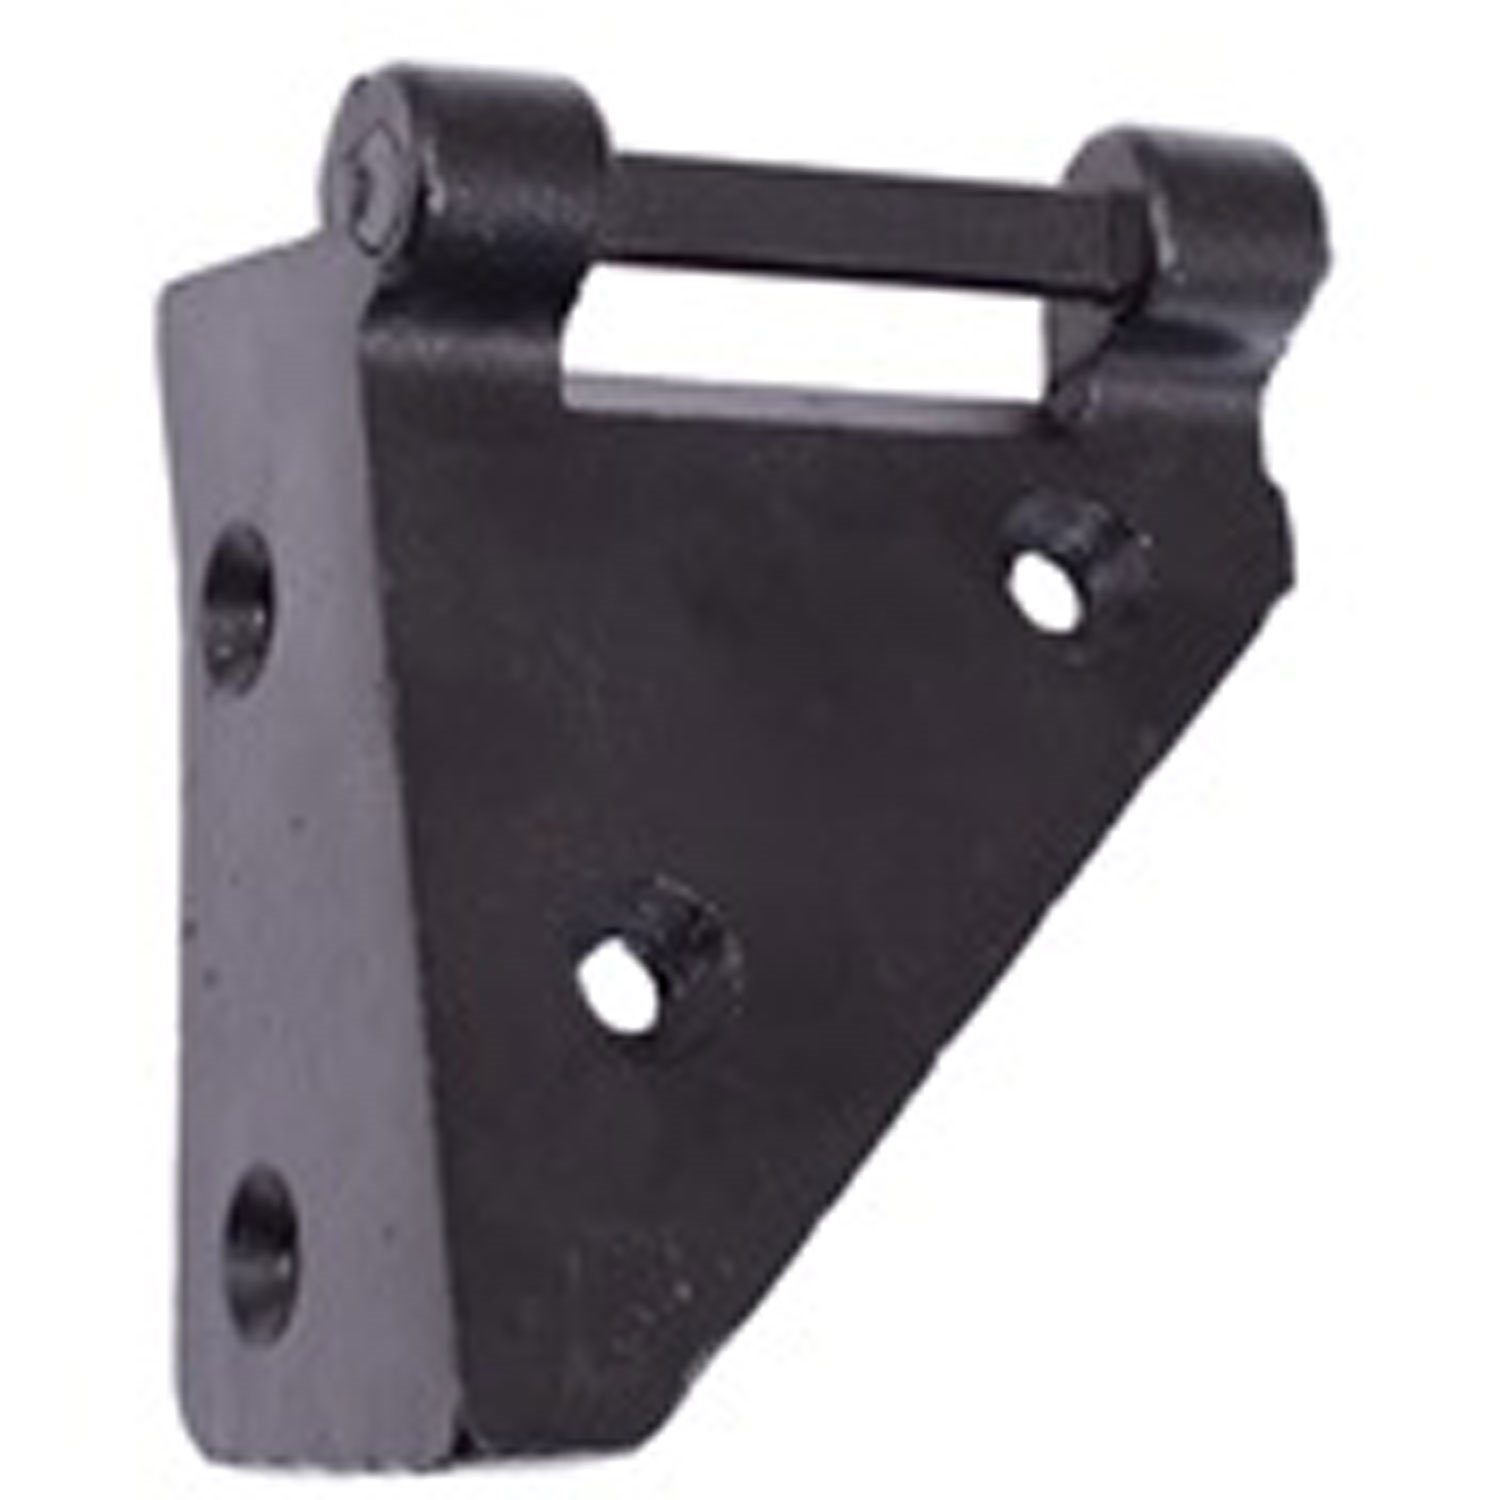 lower right replacement windshield hinge from Omix-ADA, Fits 52-75 Willys and Jeep models